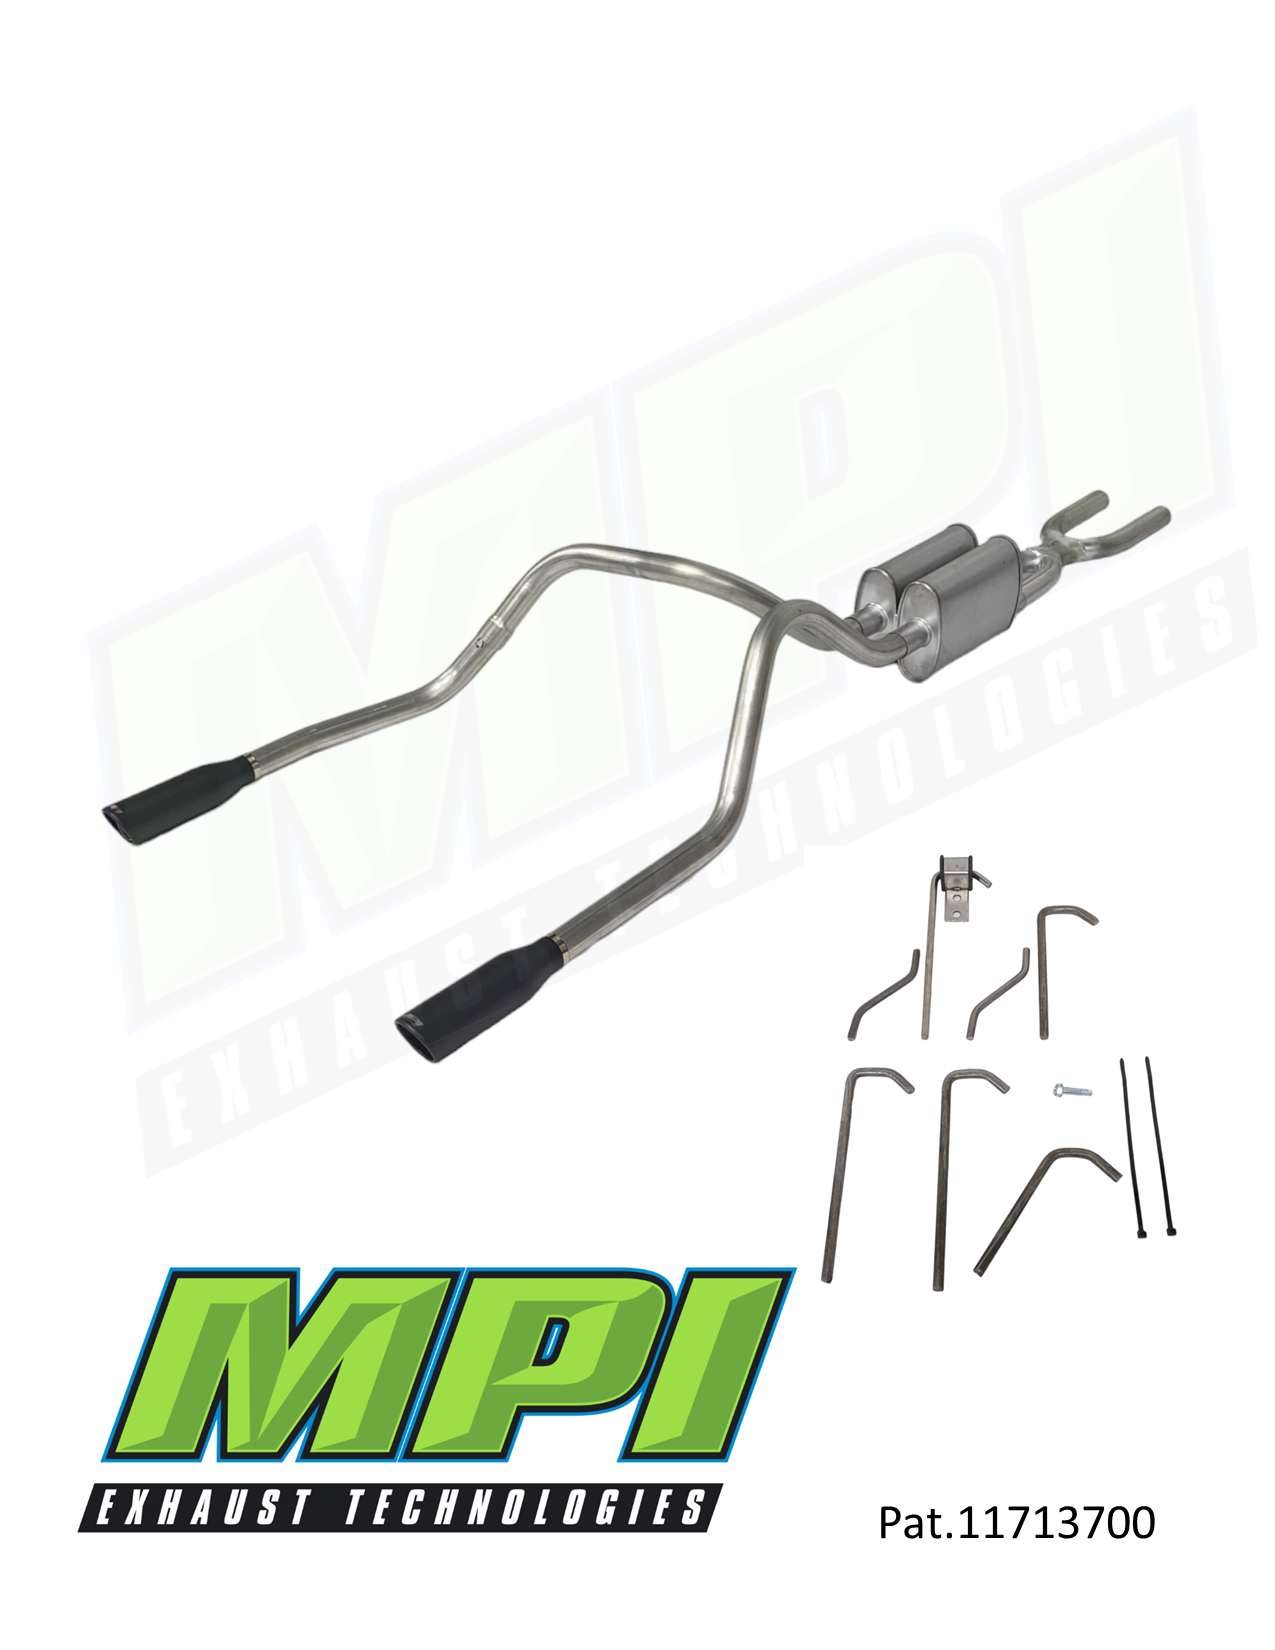 GM 8.1L 2001-2006 Truck Cat Back Dual Exhaust Kits - Weld Together